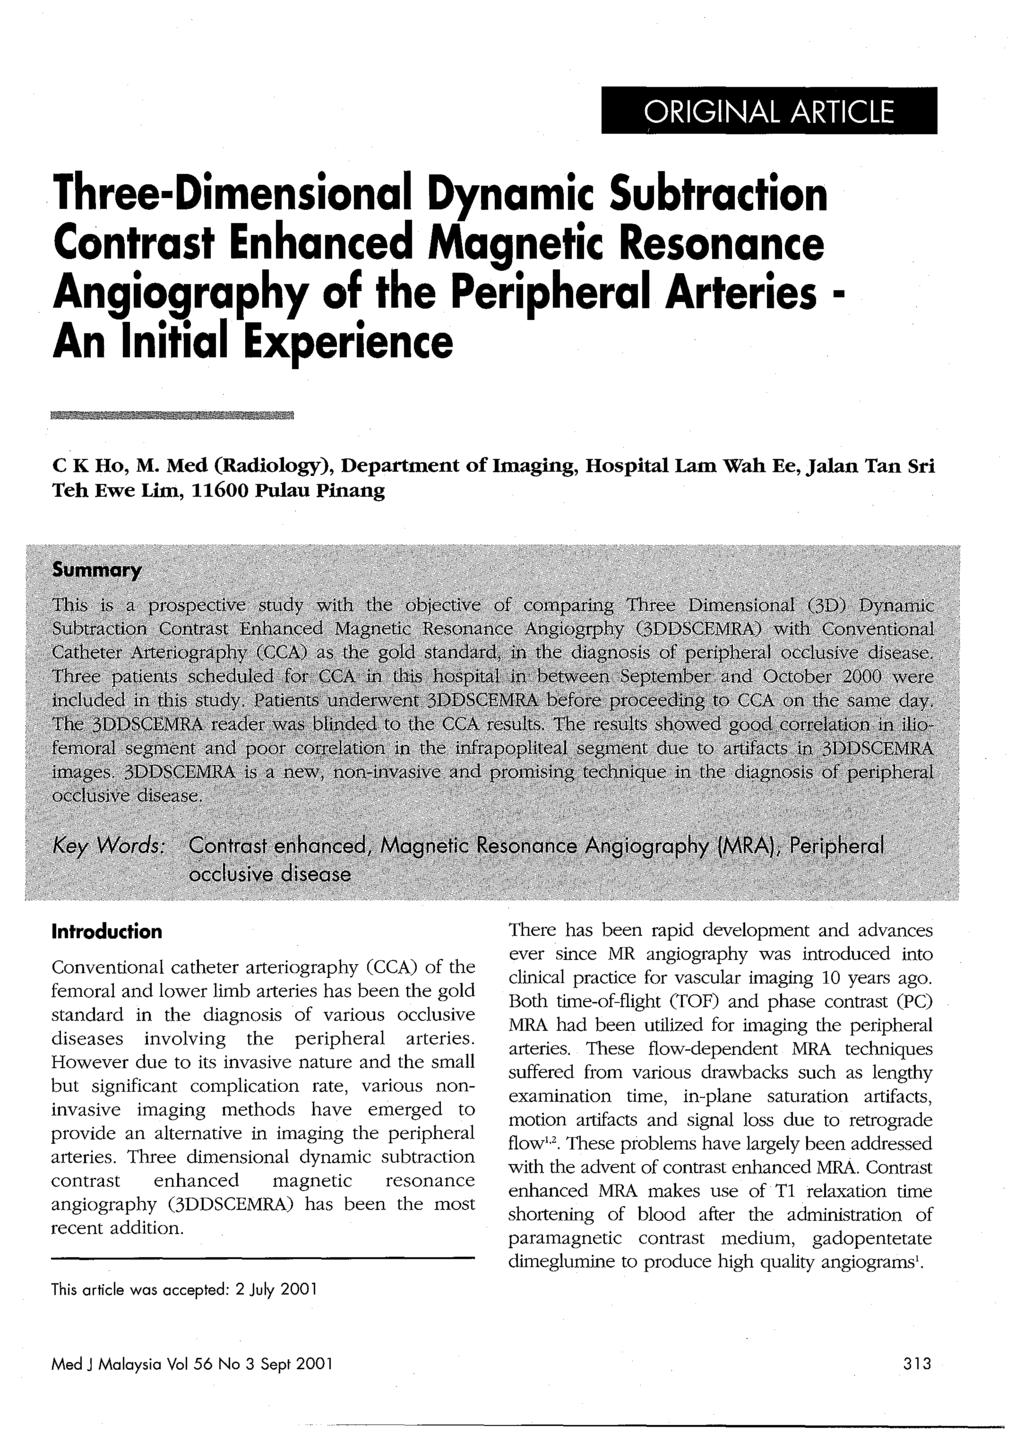 ORIGINAL ARTICLE Three-Dimensional Dynamic Subtraction Contrast Enhanced Magnetic Resonance Angiography of the Peripheral Arteries An Initial Experience C K Ho, M.